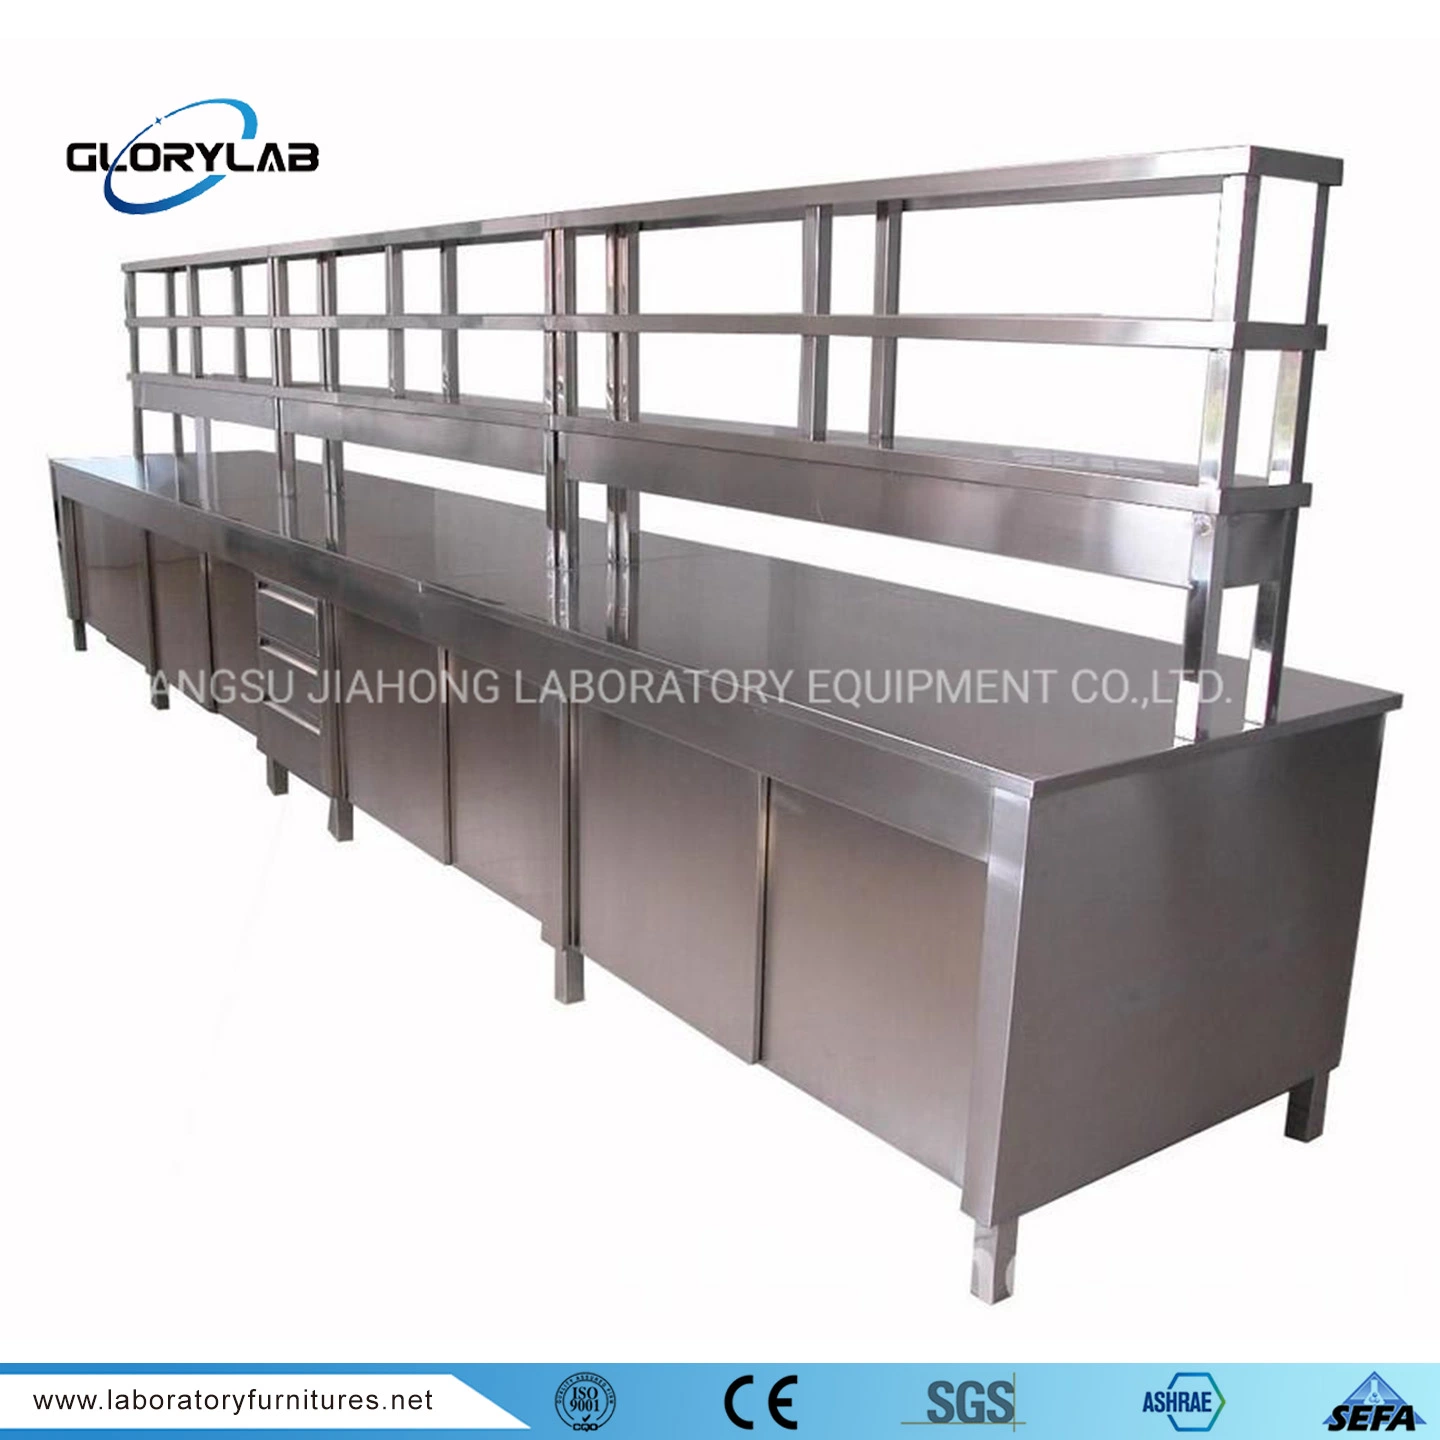 Stainless Steel Bench with Cabinet Laboratory Furniture 304stainless Steel Workstation Bench Jh-Ss006)